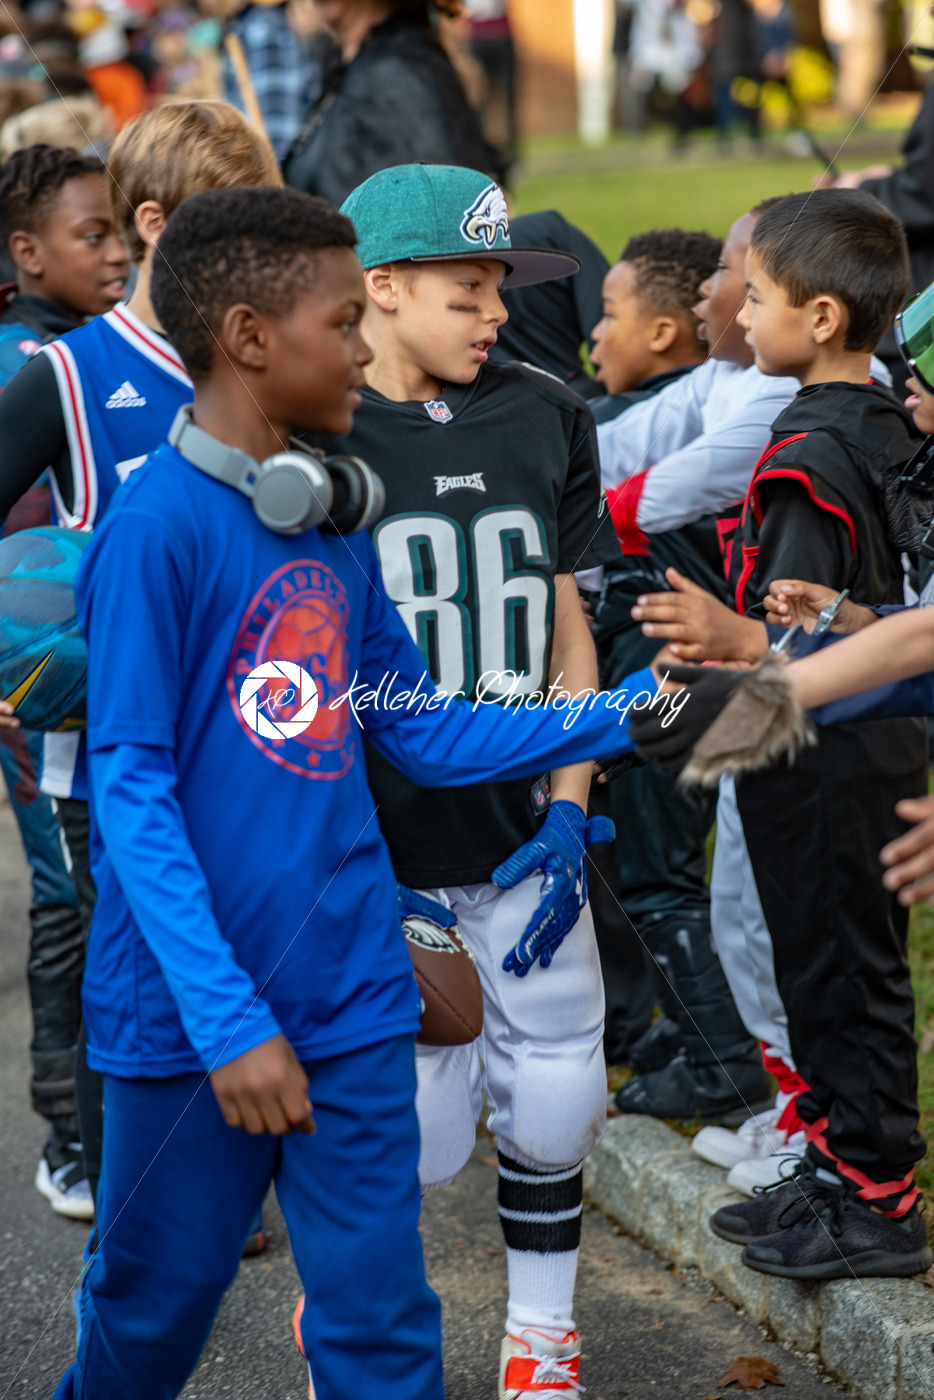 HAVERFORD, PA – OCTOBER 31, 2018 – The Haverford School Halloween Parade - Kelleher Photography Store